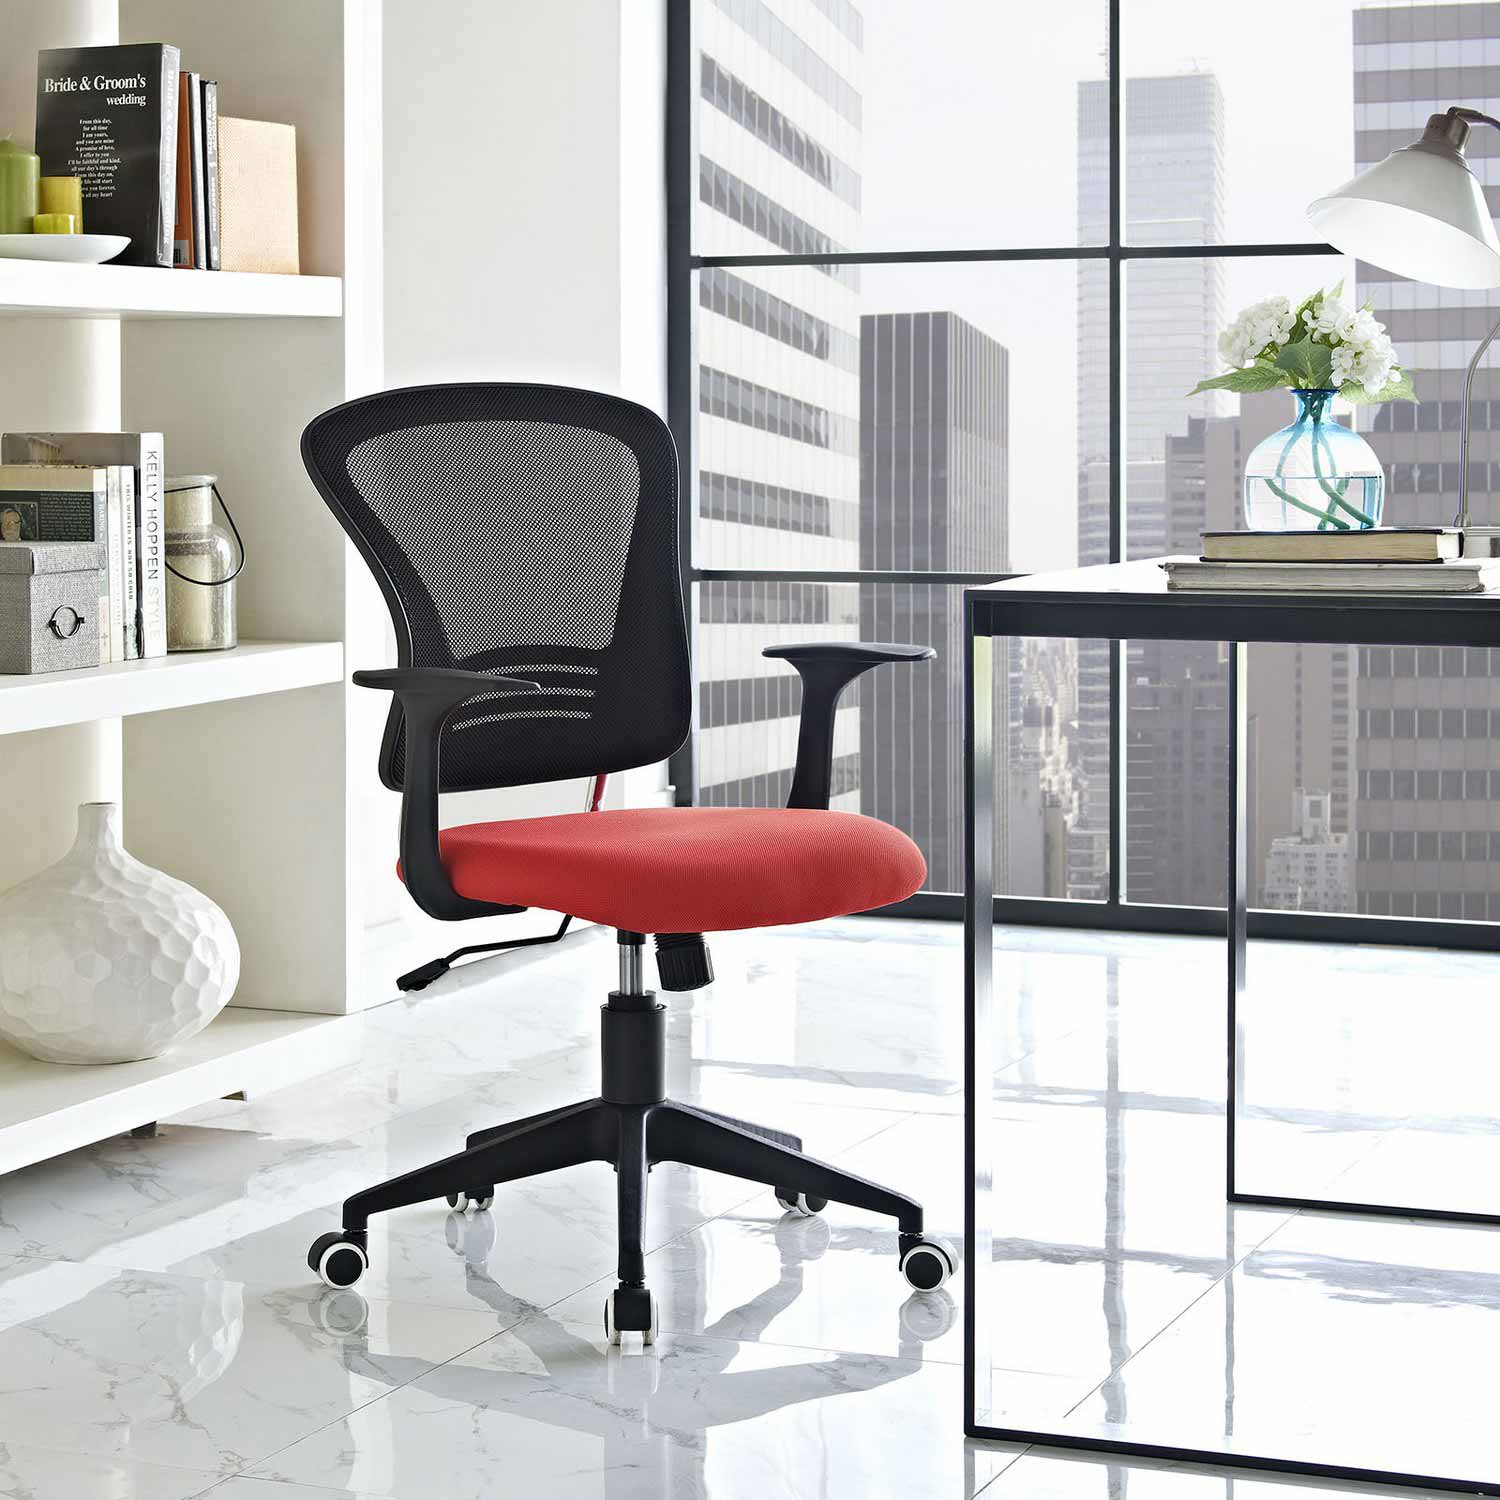 Modway Poise Office Chair - Red